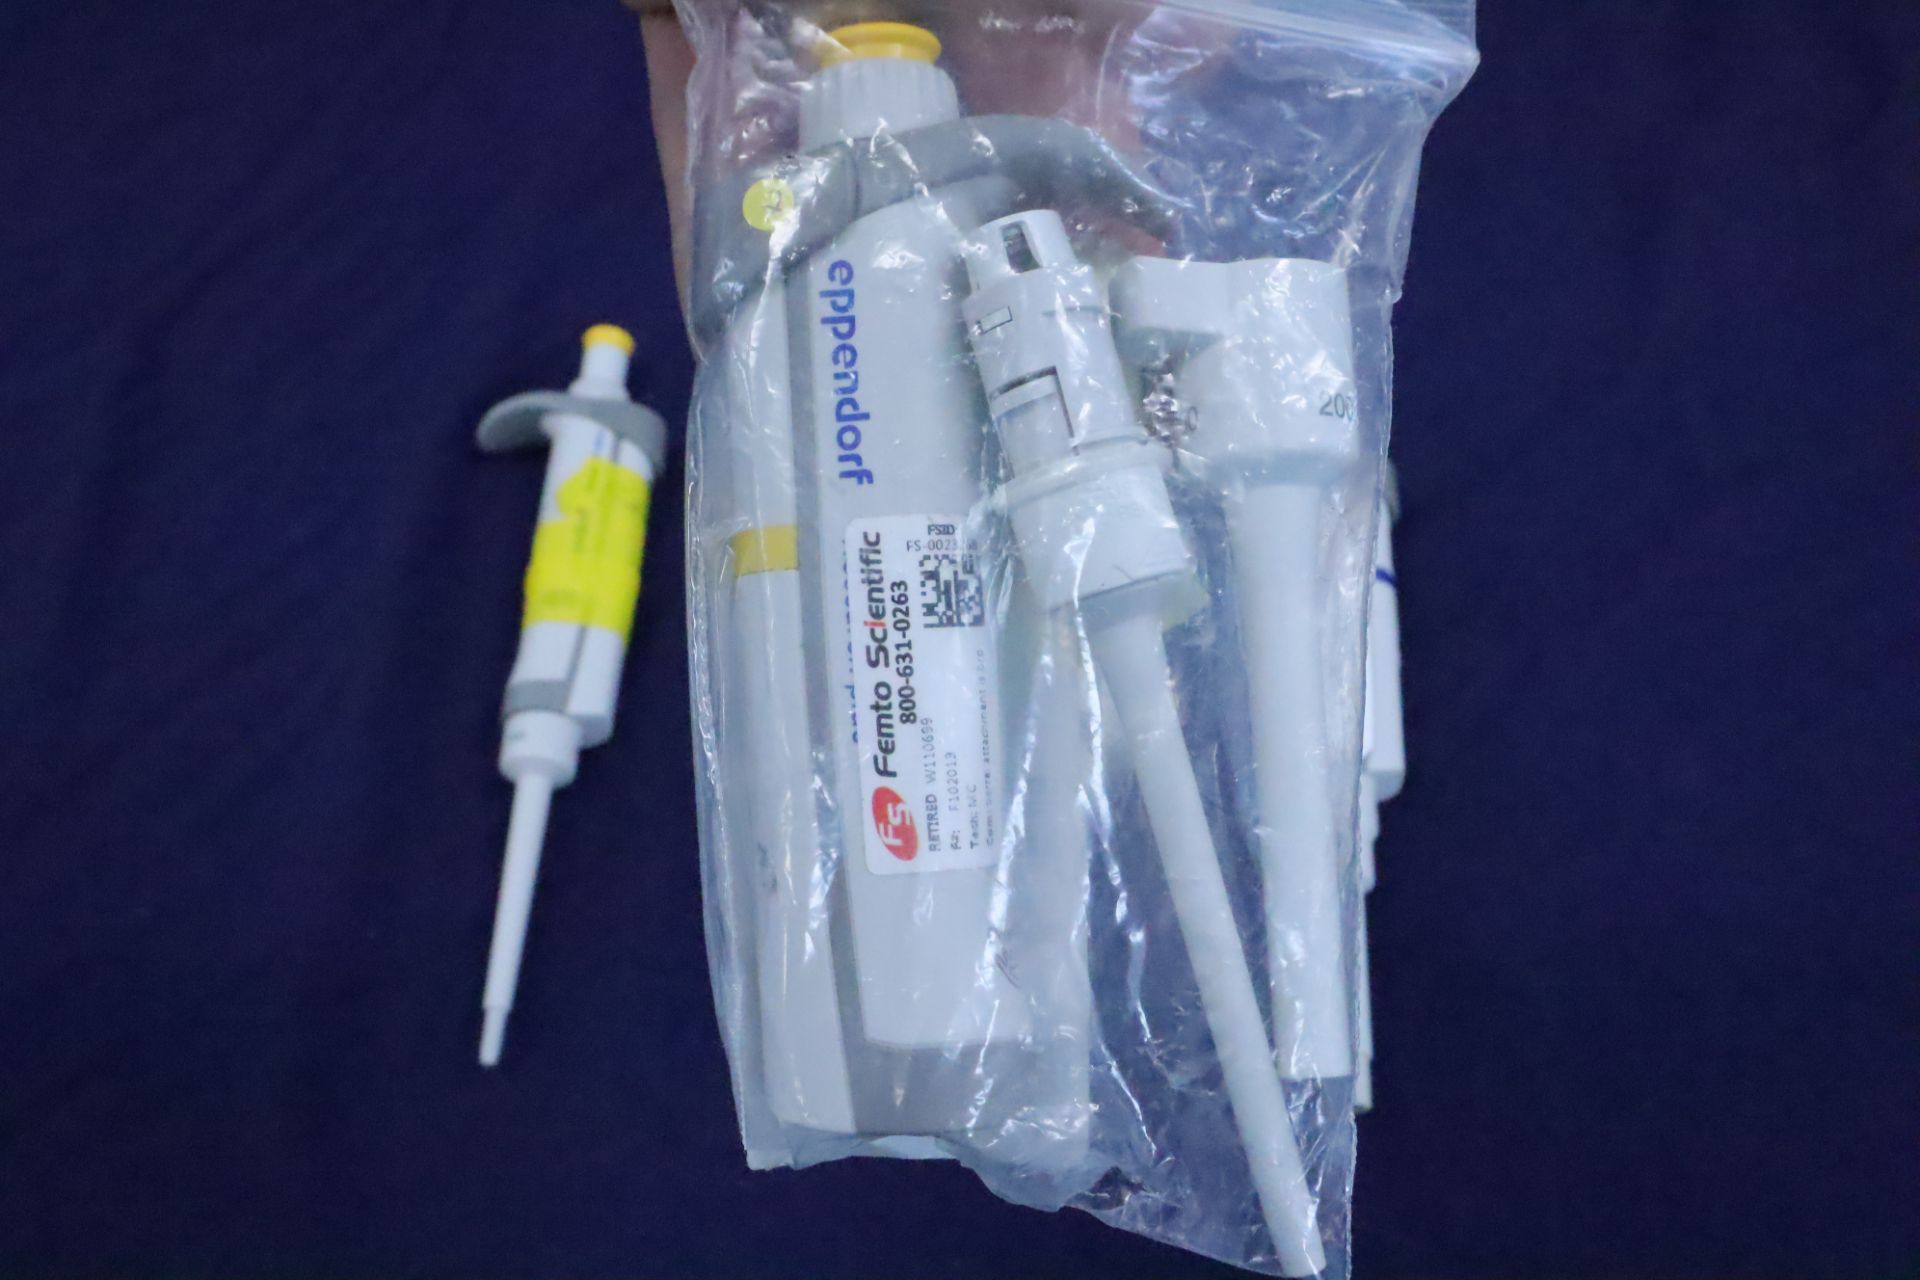 Eppendorf Research Plus Adjustable Volume Pipette - Out Of Service (Qty 5) - Image 3 of 3